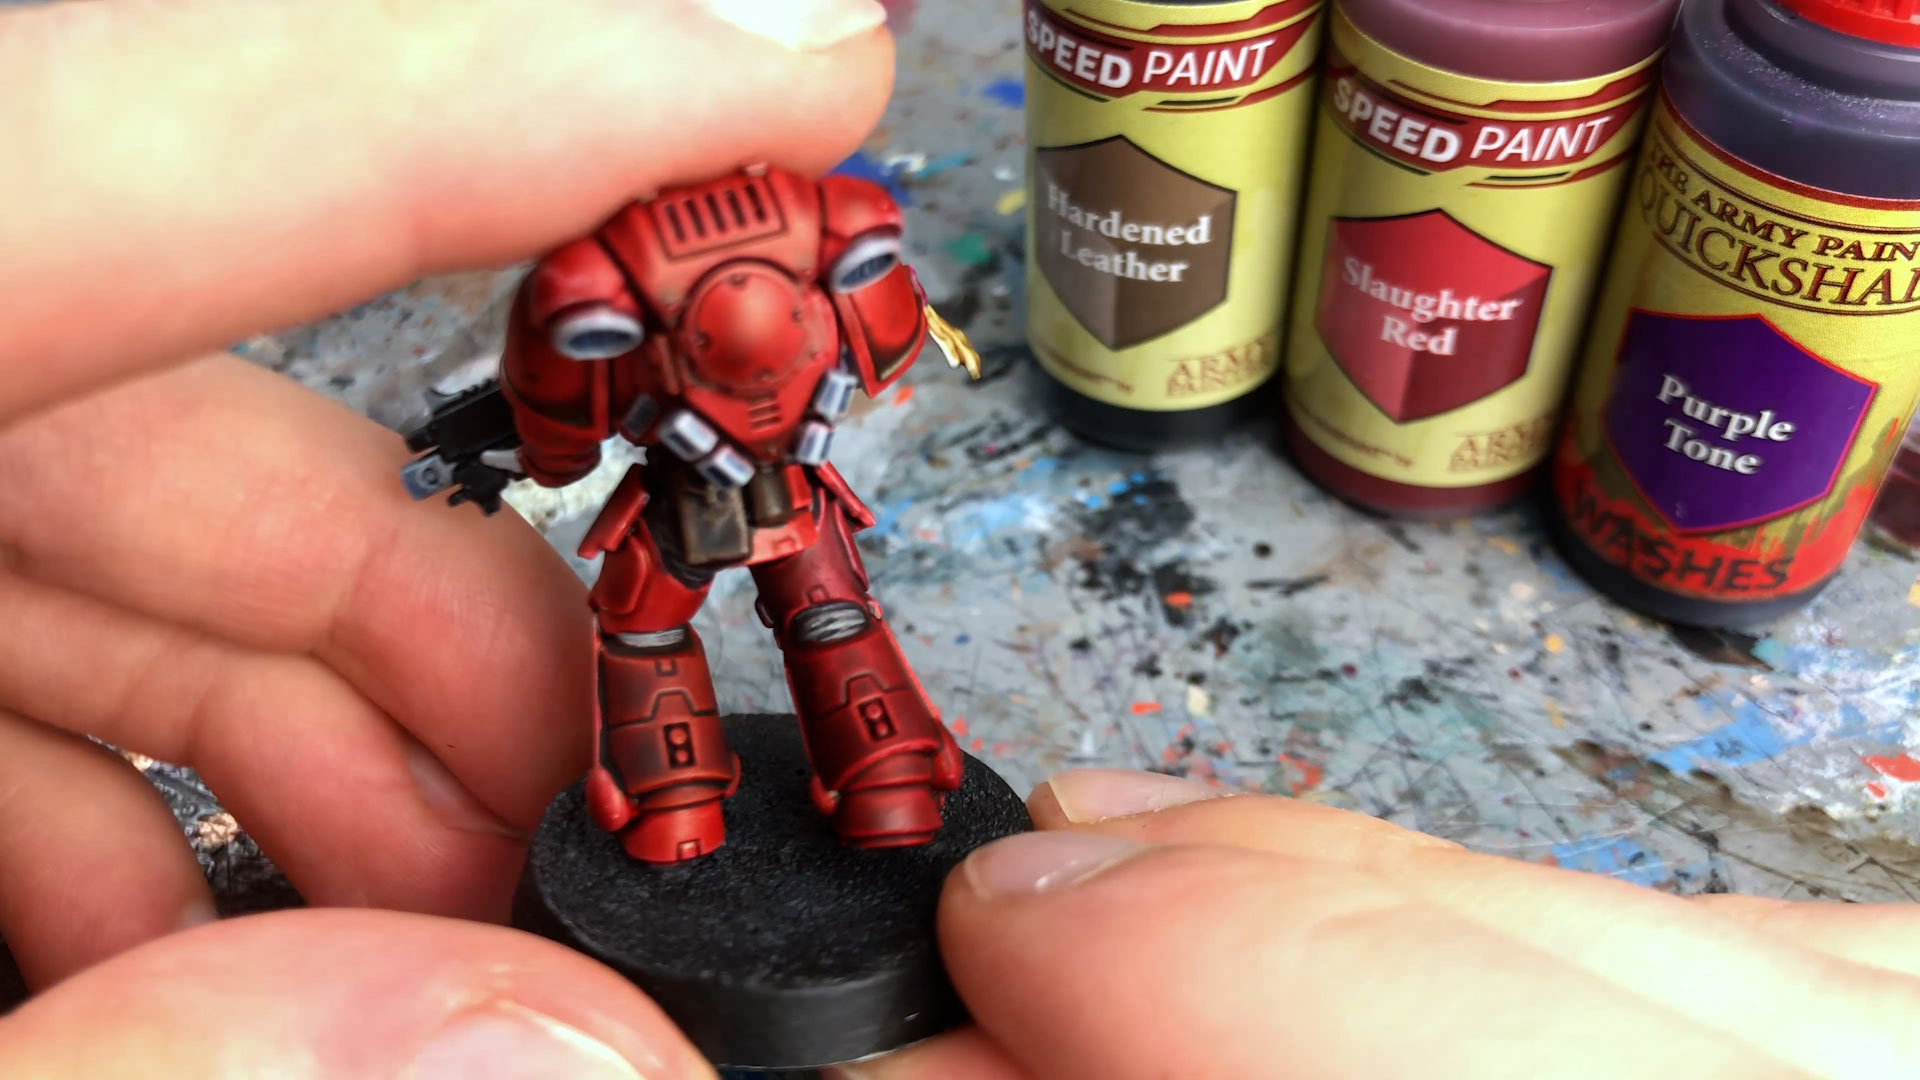 Hardened Leather, Slaughter Red, and Puple Tone Wash over Blood Red Speedpaint